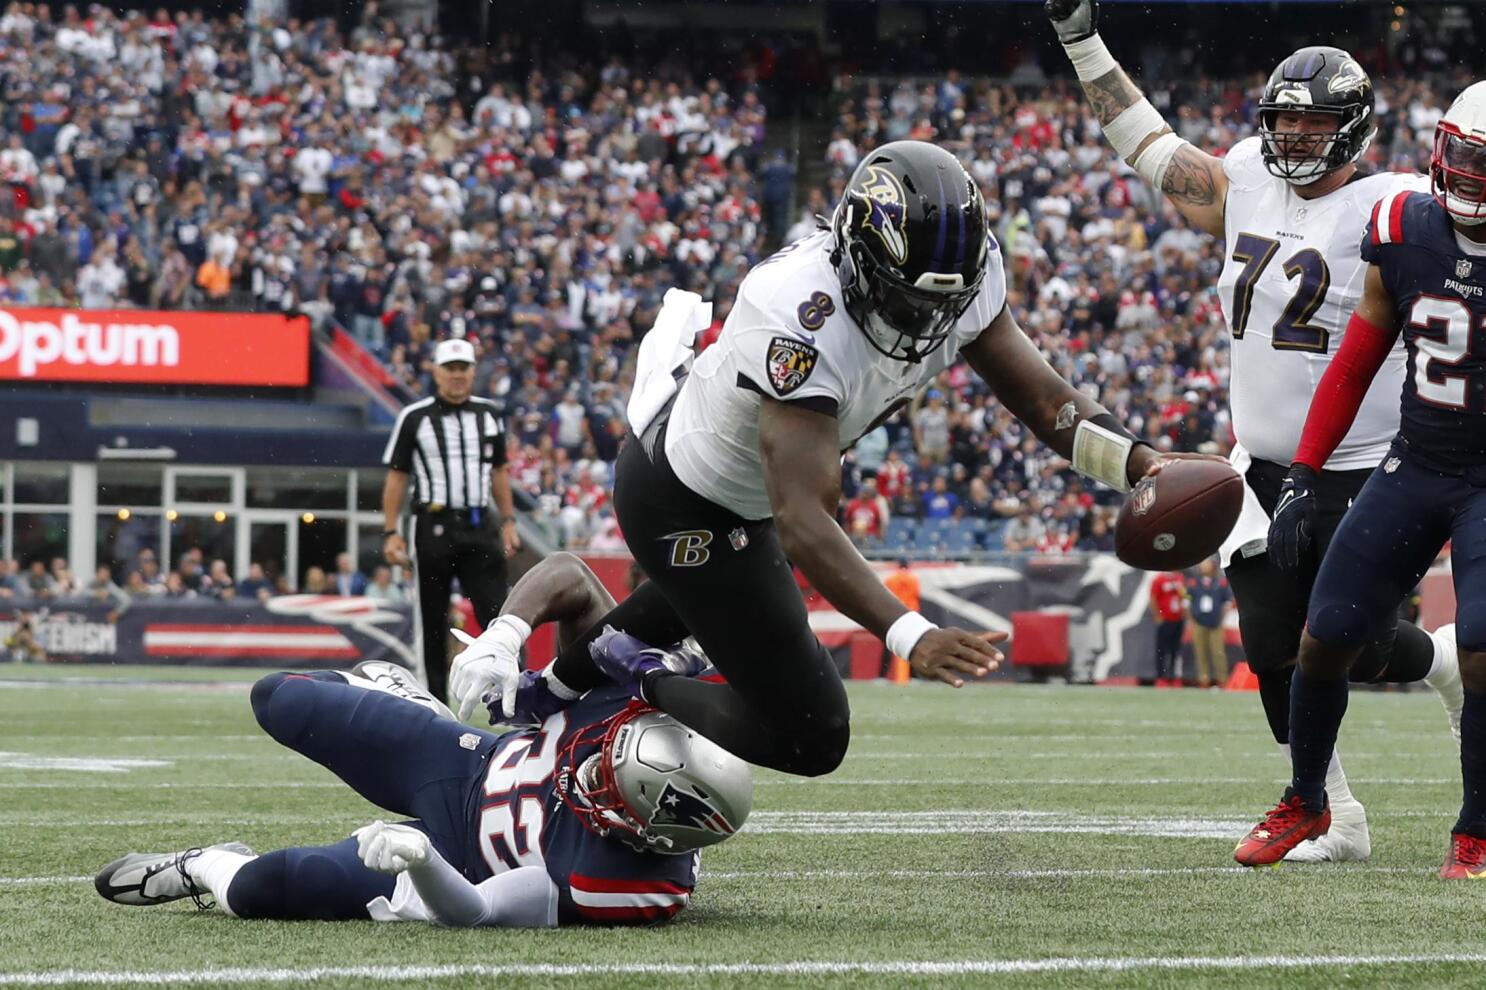 Jackson accounts for 5 TDs, Ravens hold off Patriots 37-26 - The